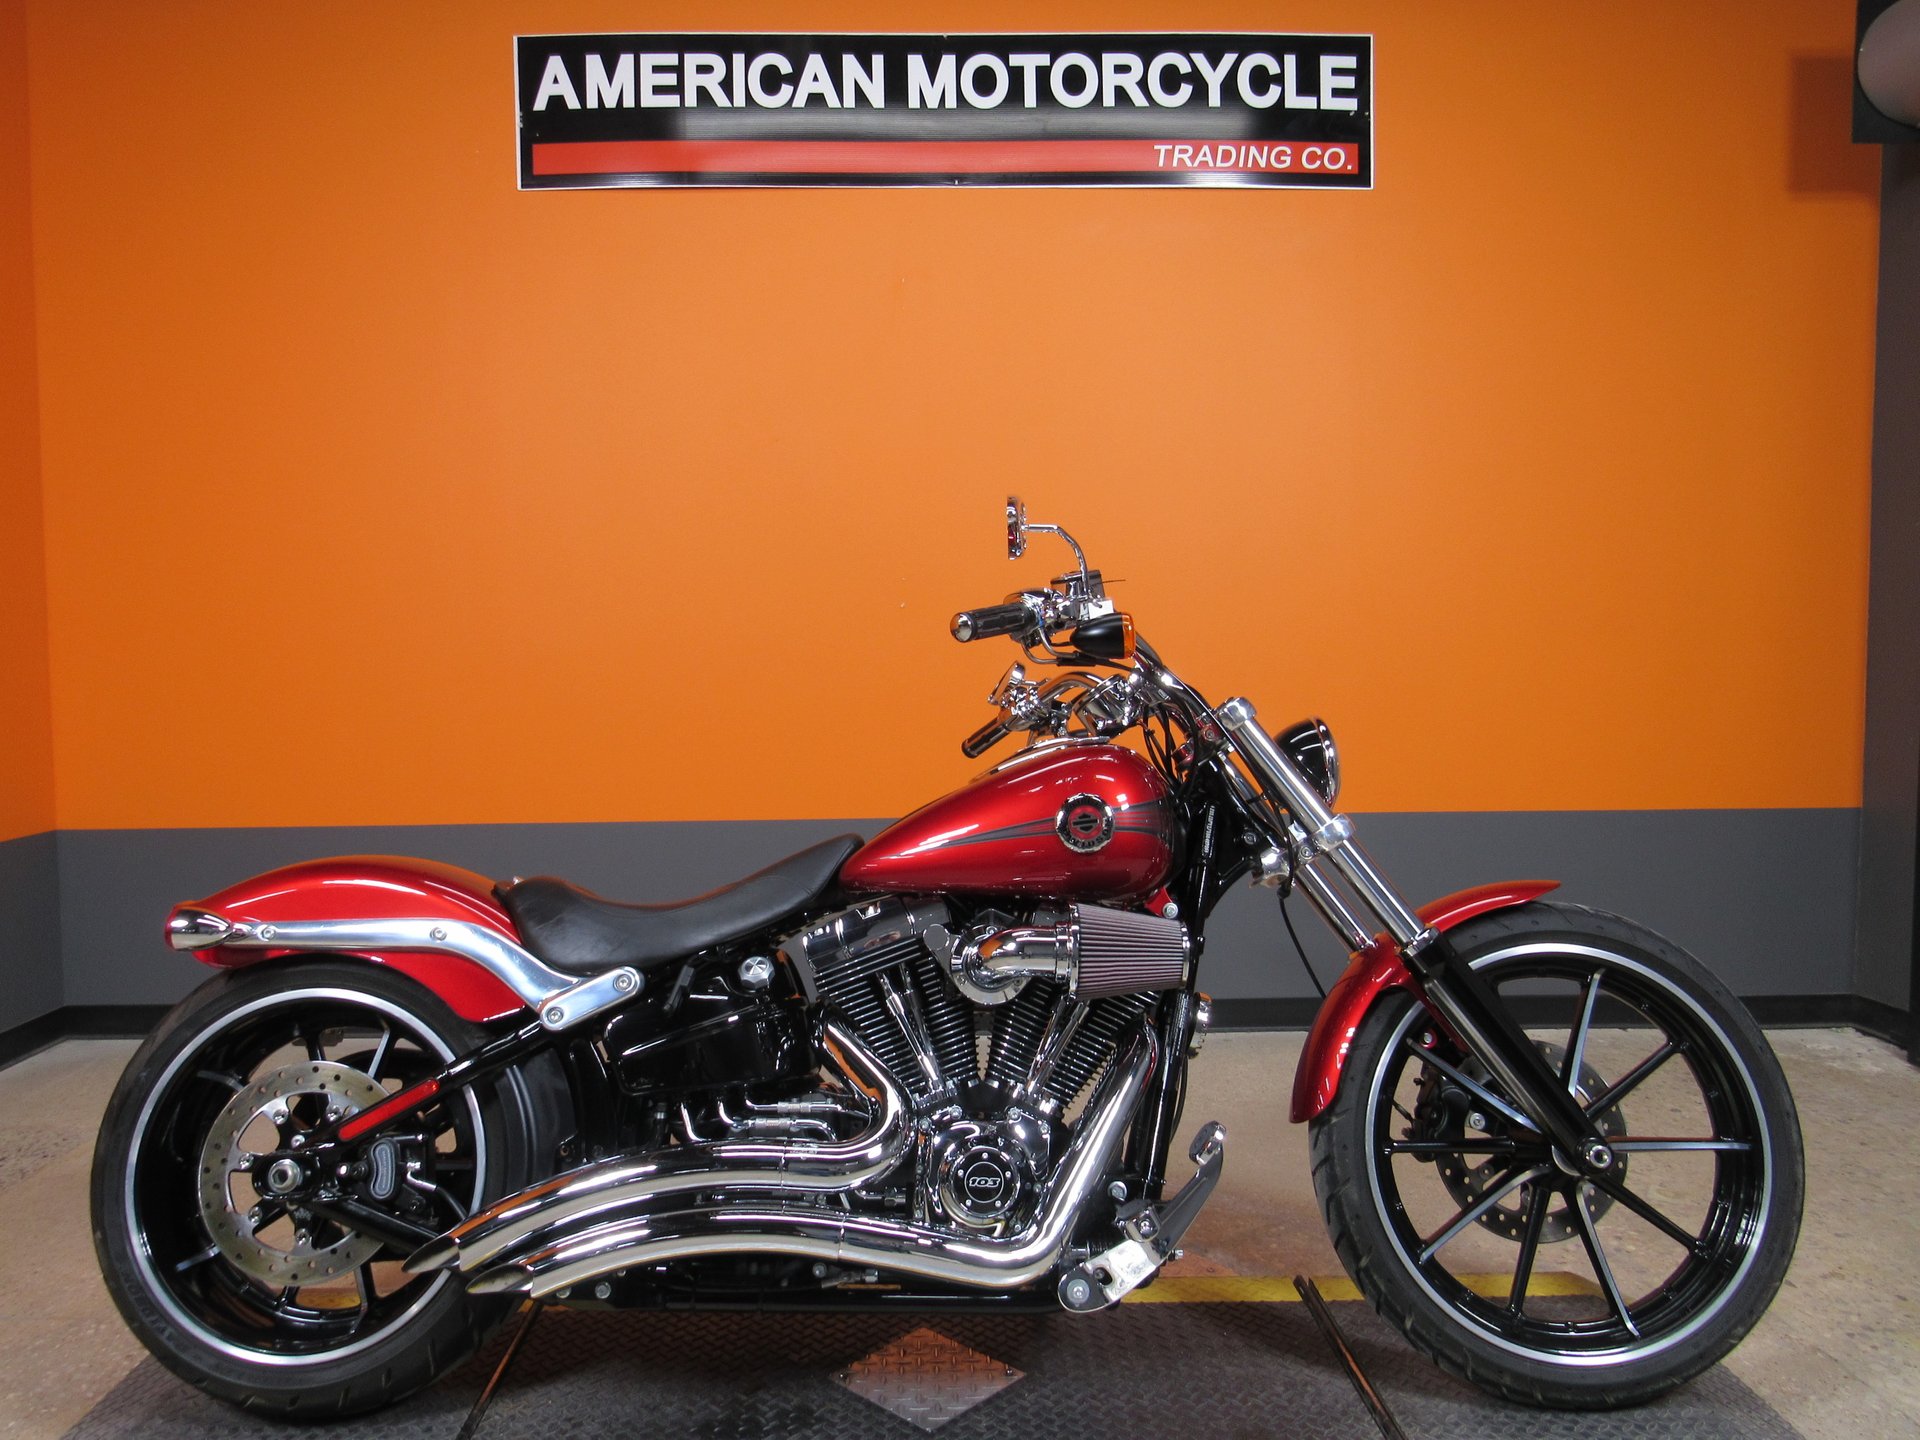 2013 Harley Davidson Softail Breakout American Motorcycle Trading Company Used Harley Davidson Motorcycles